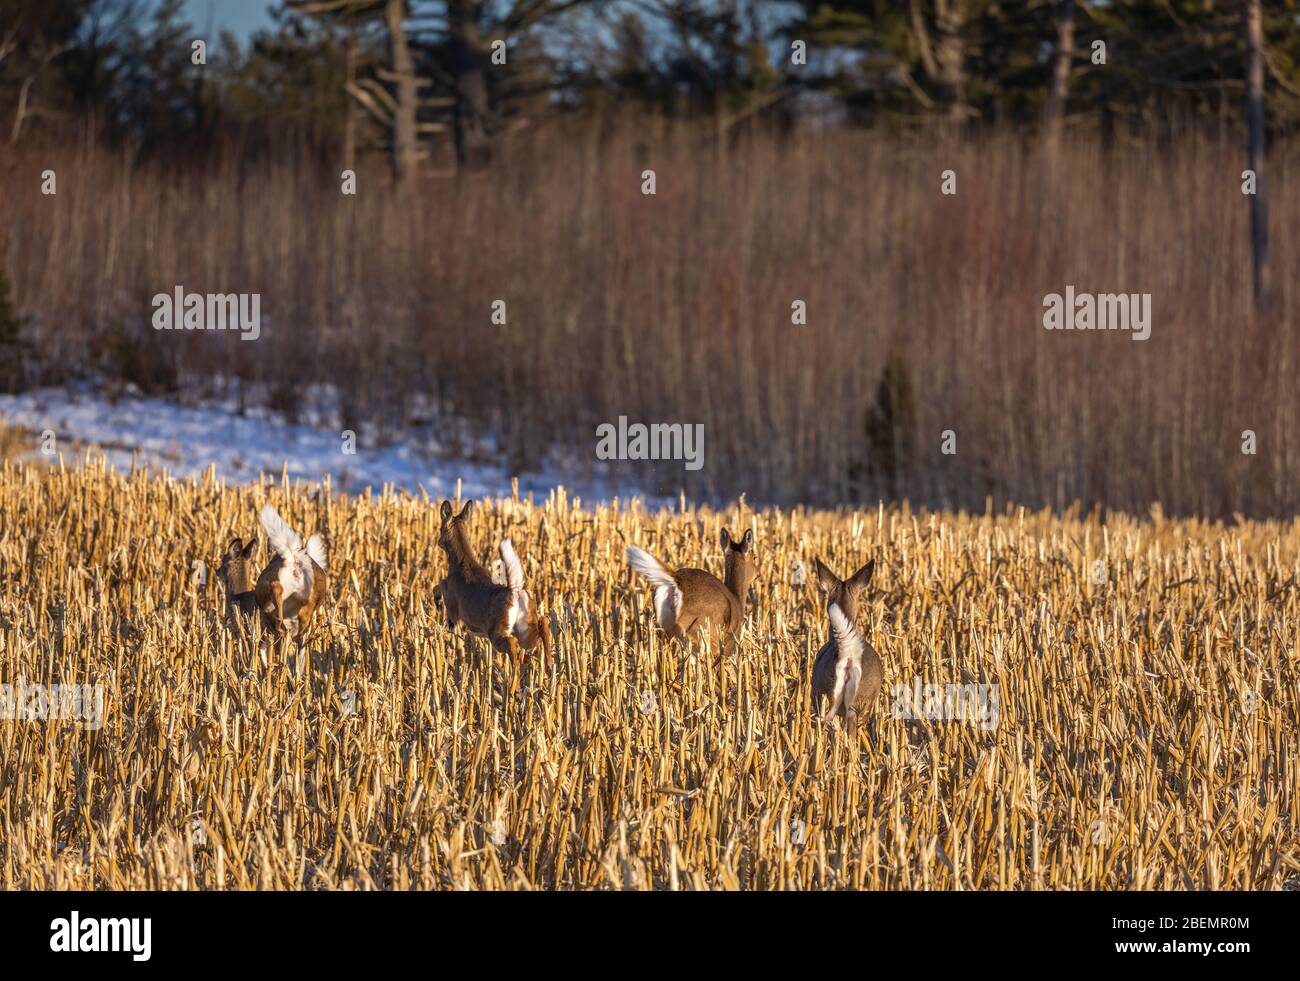 Alarmed whitetails in a cut cornfield in northern Wisconsin. Stock Photo